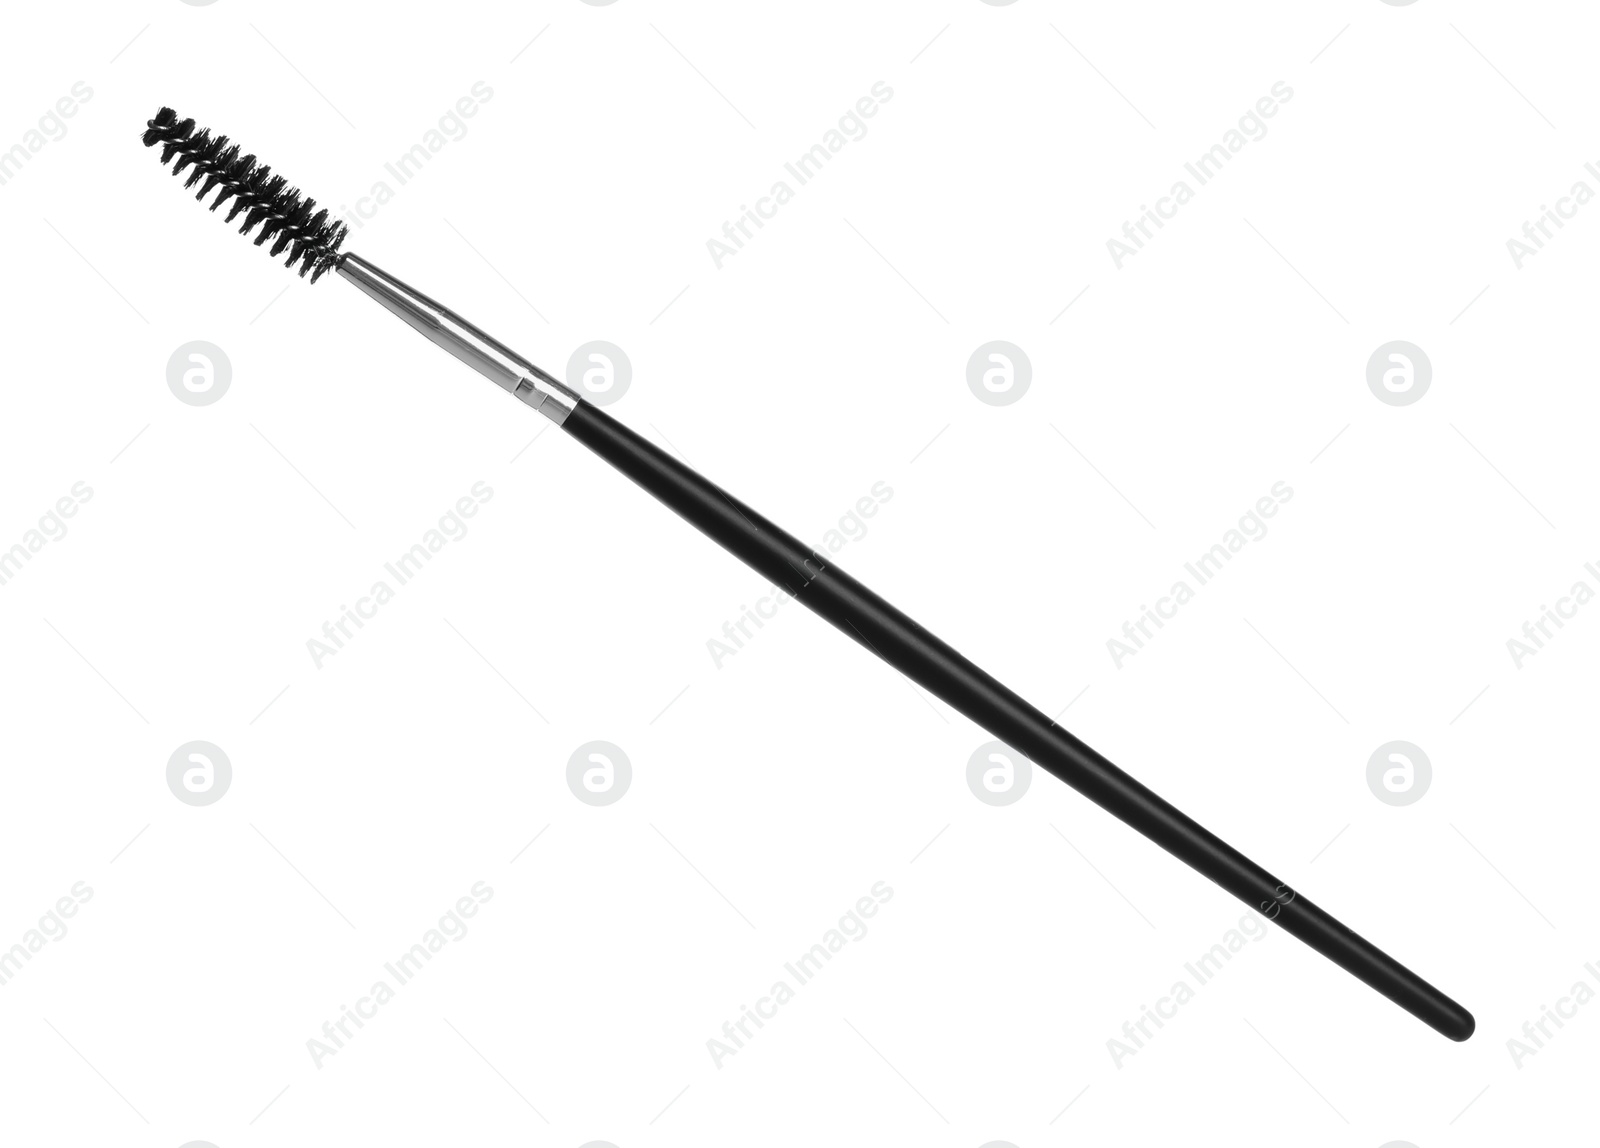 Photo of Makeup applicator brush for lashes isolated on white